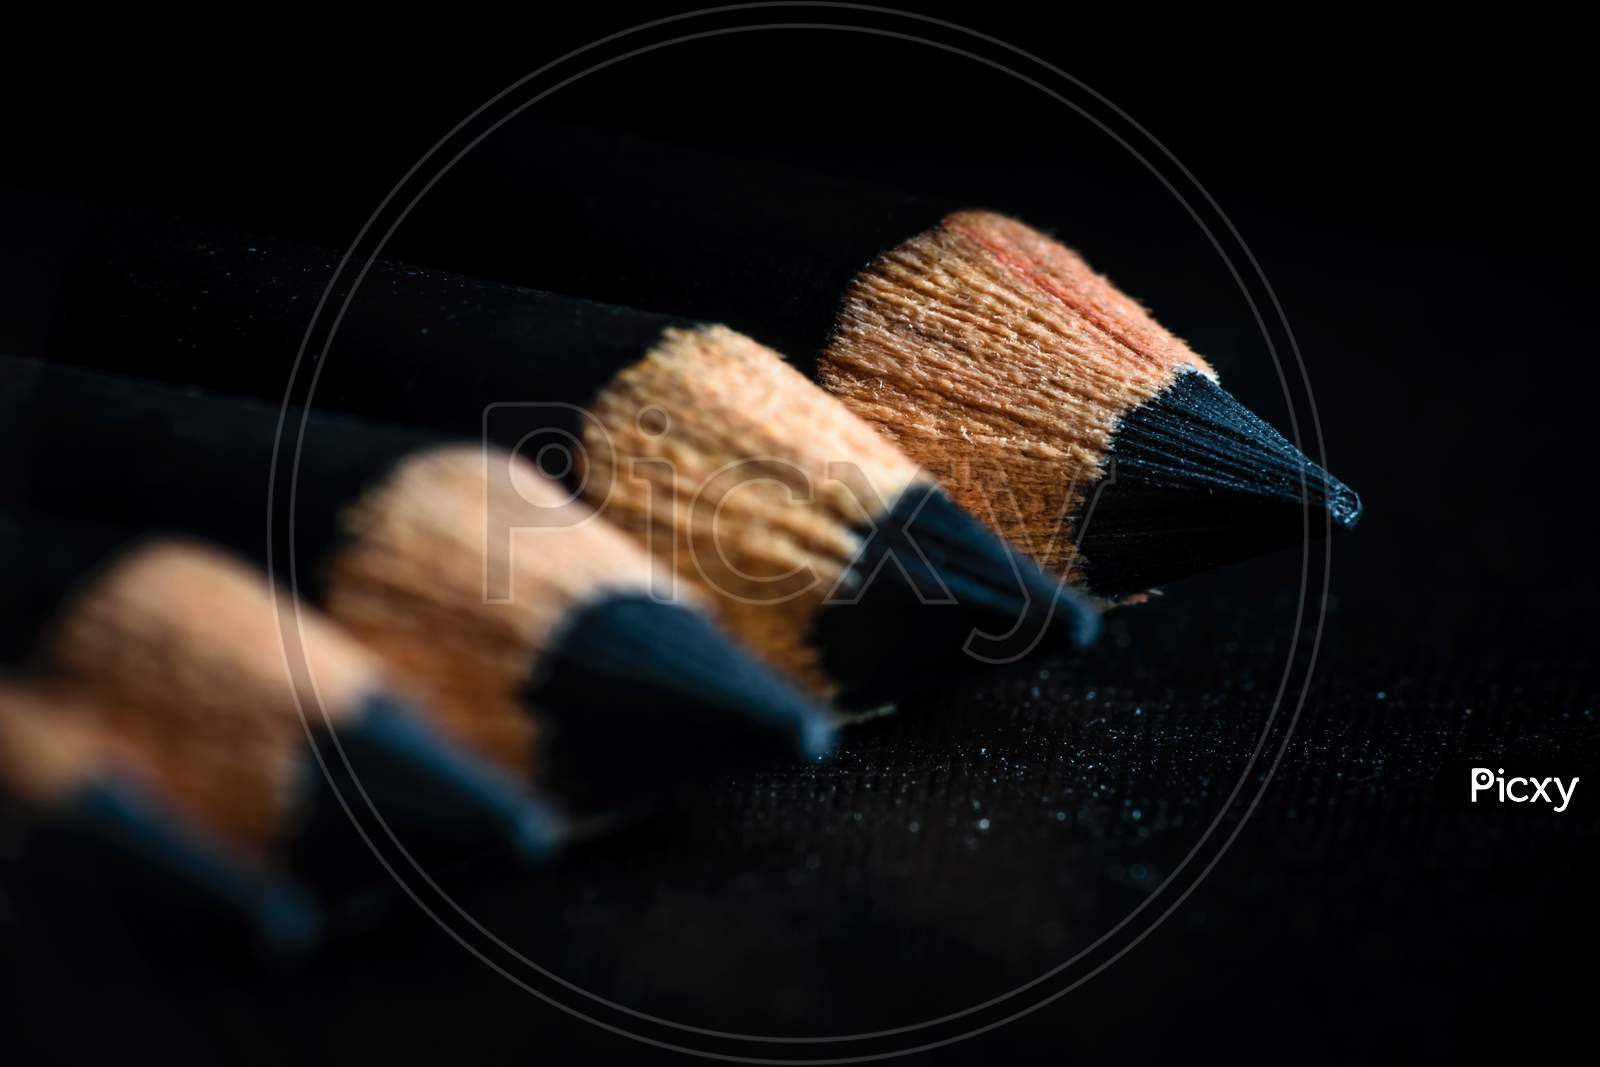 A Group Of Pencils Are Kept On A Dark Paper In Ascending Order. Selective Focus On The Tip Of The Distal Pencil